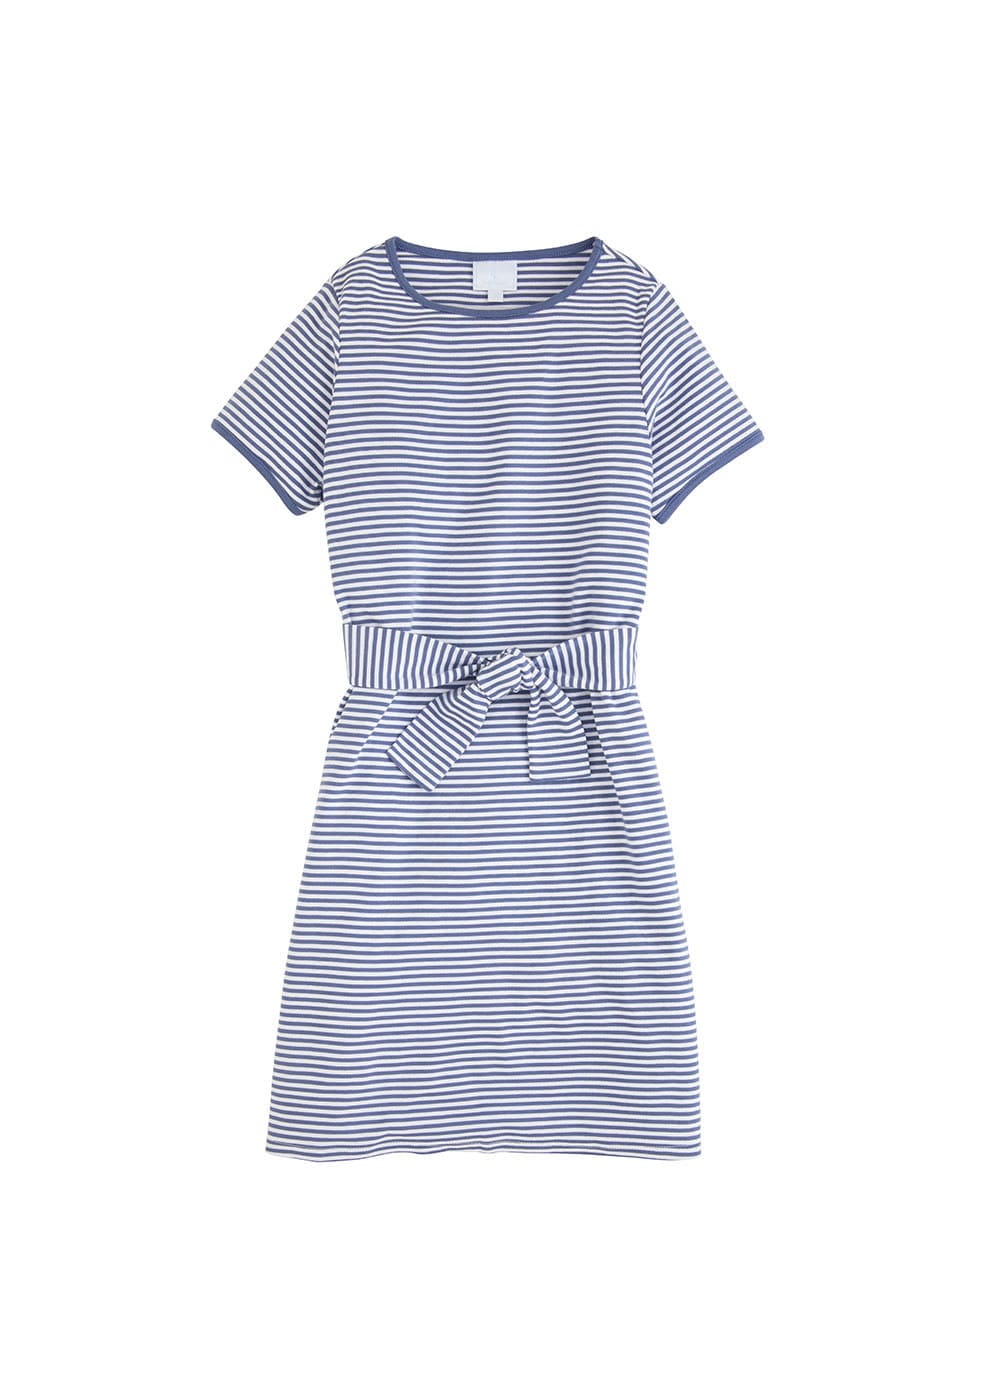 classic girls clothing girls t-shirt dress in grey blue and white stripes with front waist bow 